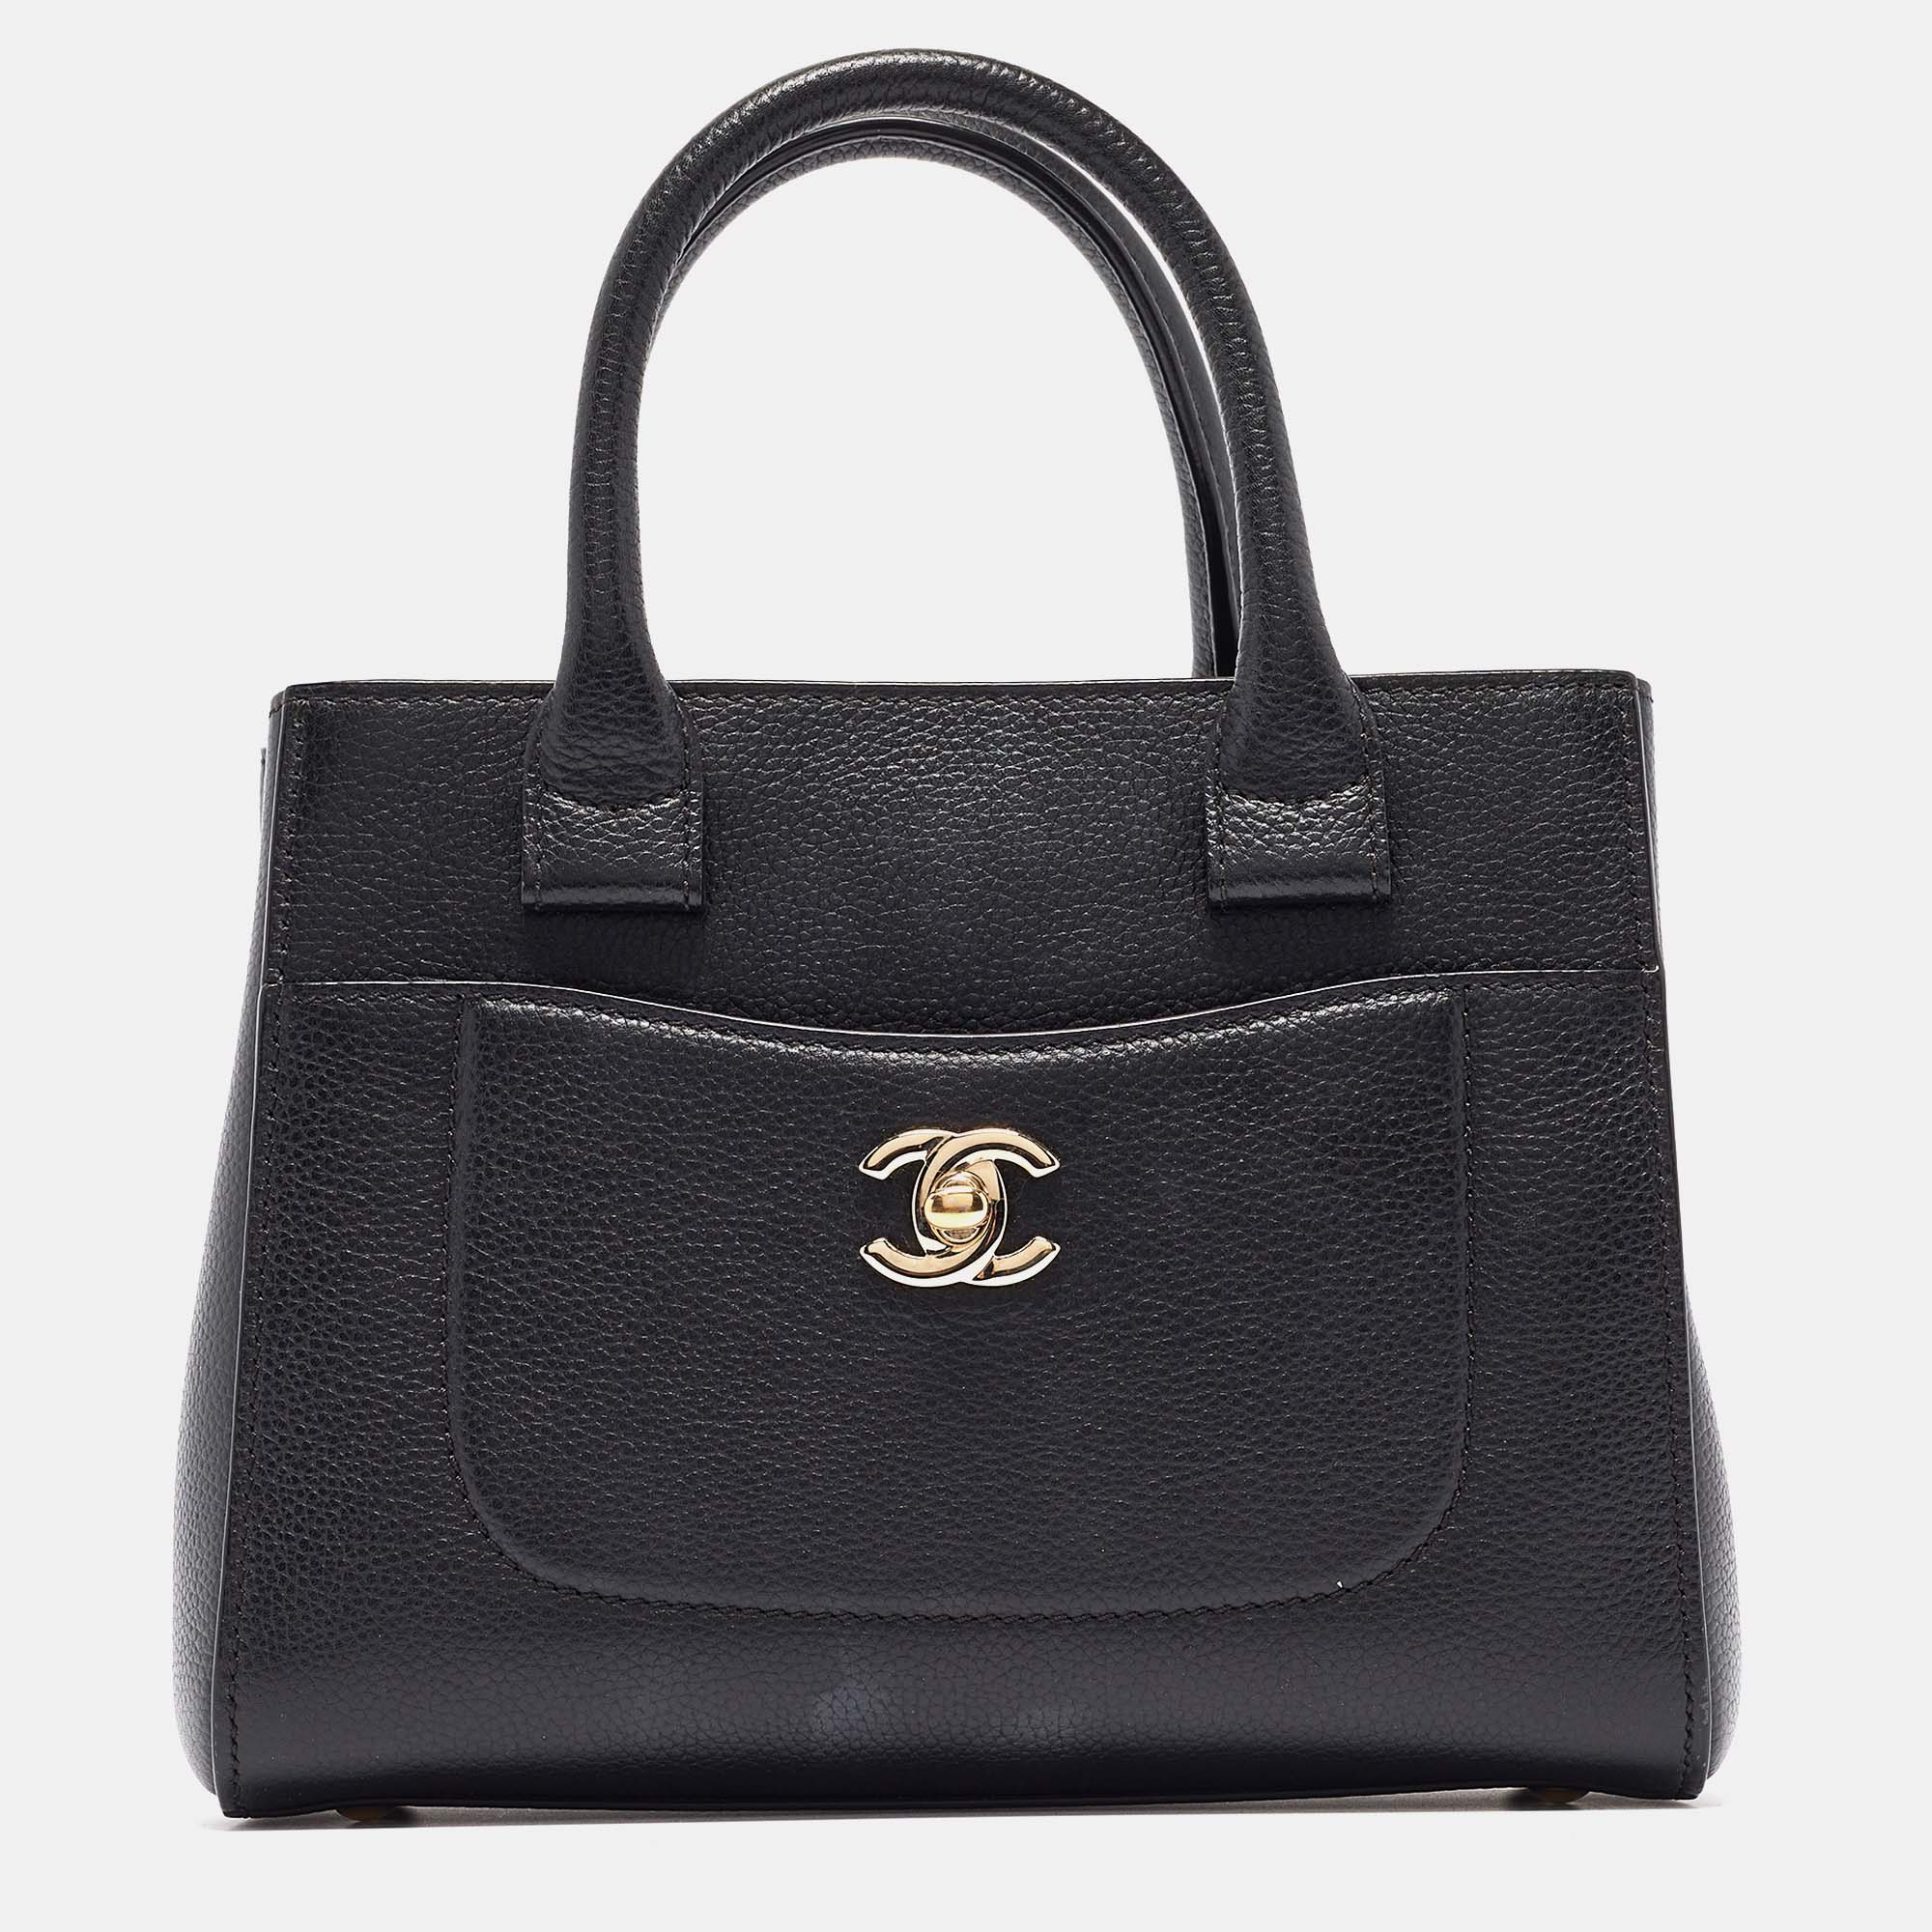 Thoughtful details high quality and everyday convenience mark this designer bag for women by Chanel. The bag is sewn with skill to deliver a refined look and an impeccable finish.